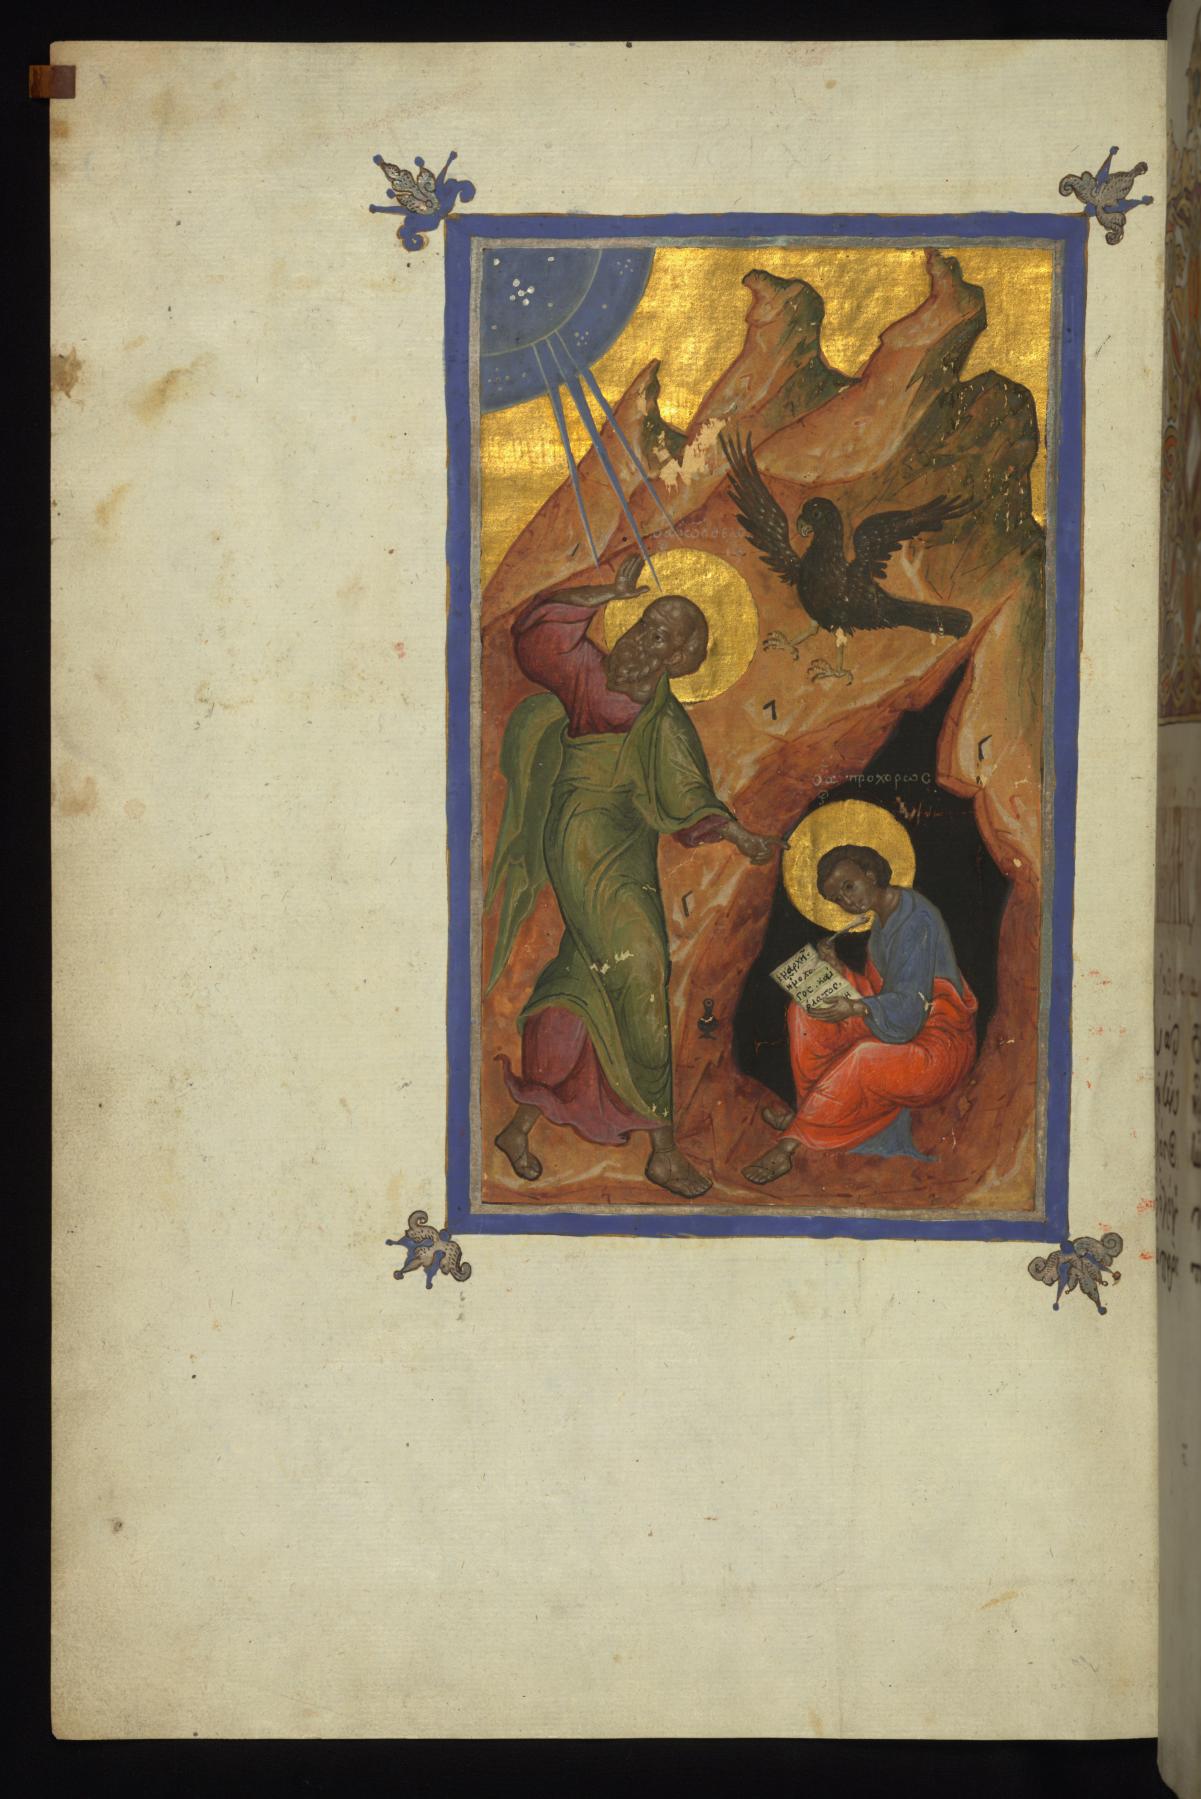 The Evangelist John Receiving Divine Inspiration and Dictating the Gospel to His Disciple Prochorus by Lukas of Cyprus (1594-1596, Ottoman) - Public Domain Illuminated Manuscript